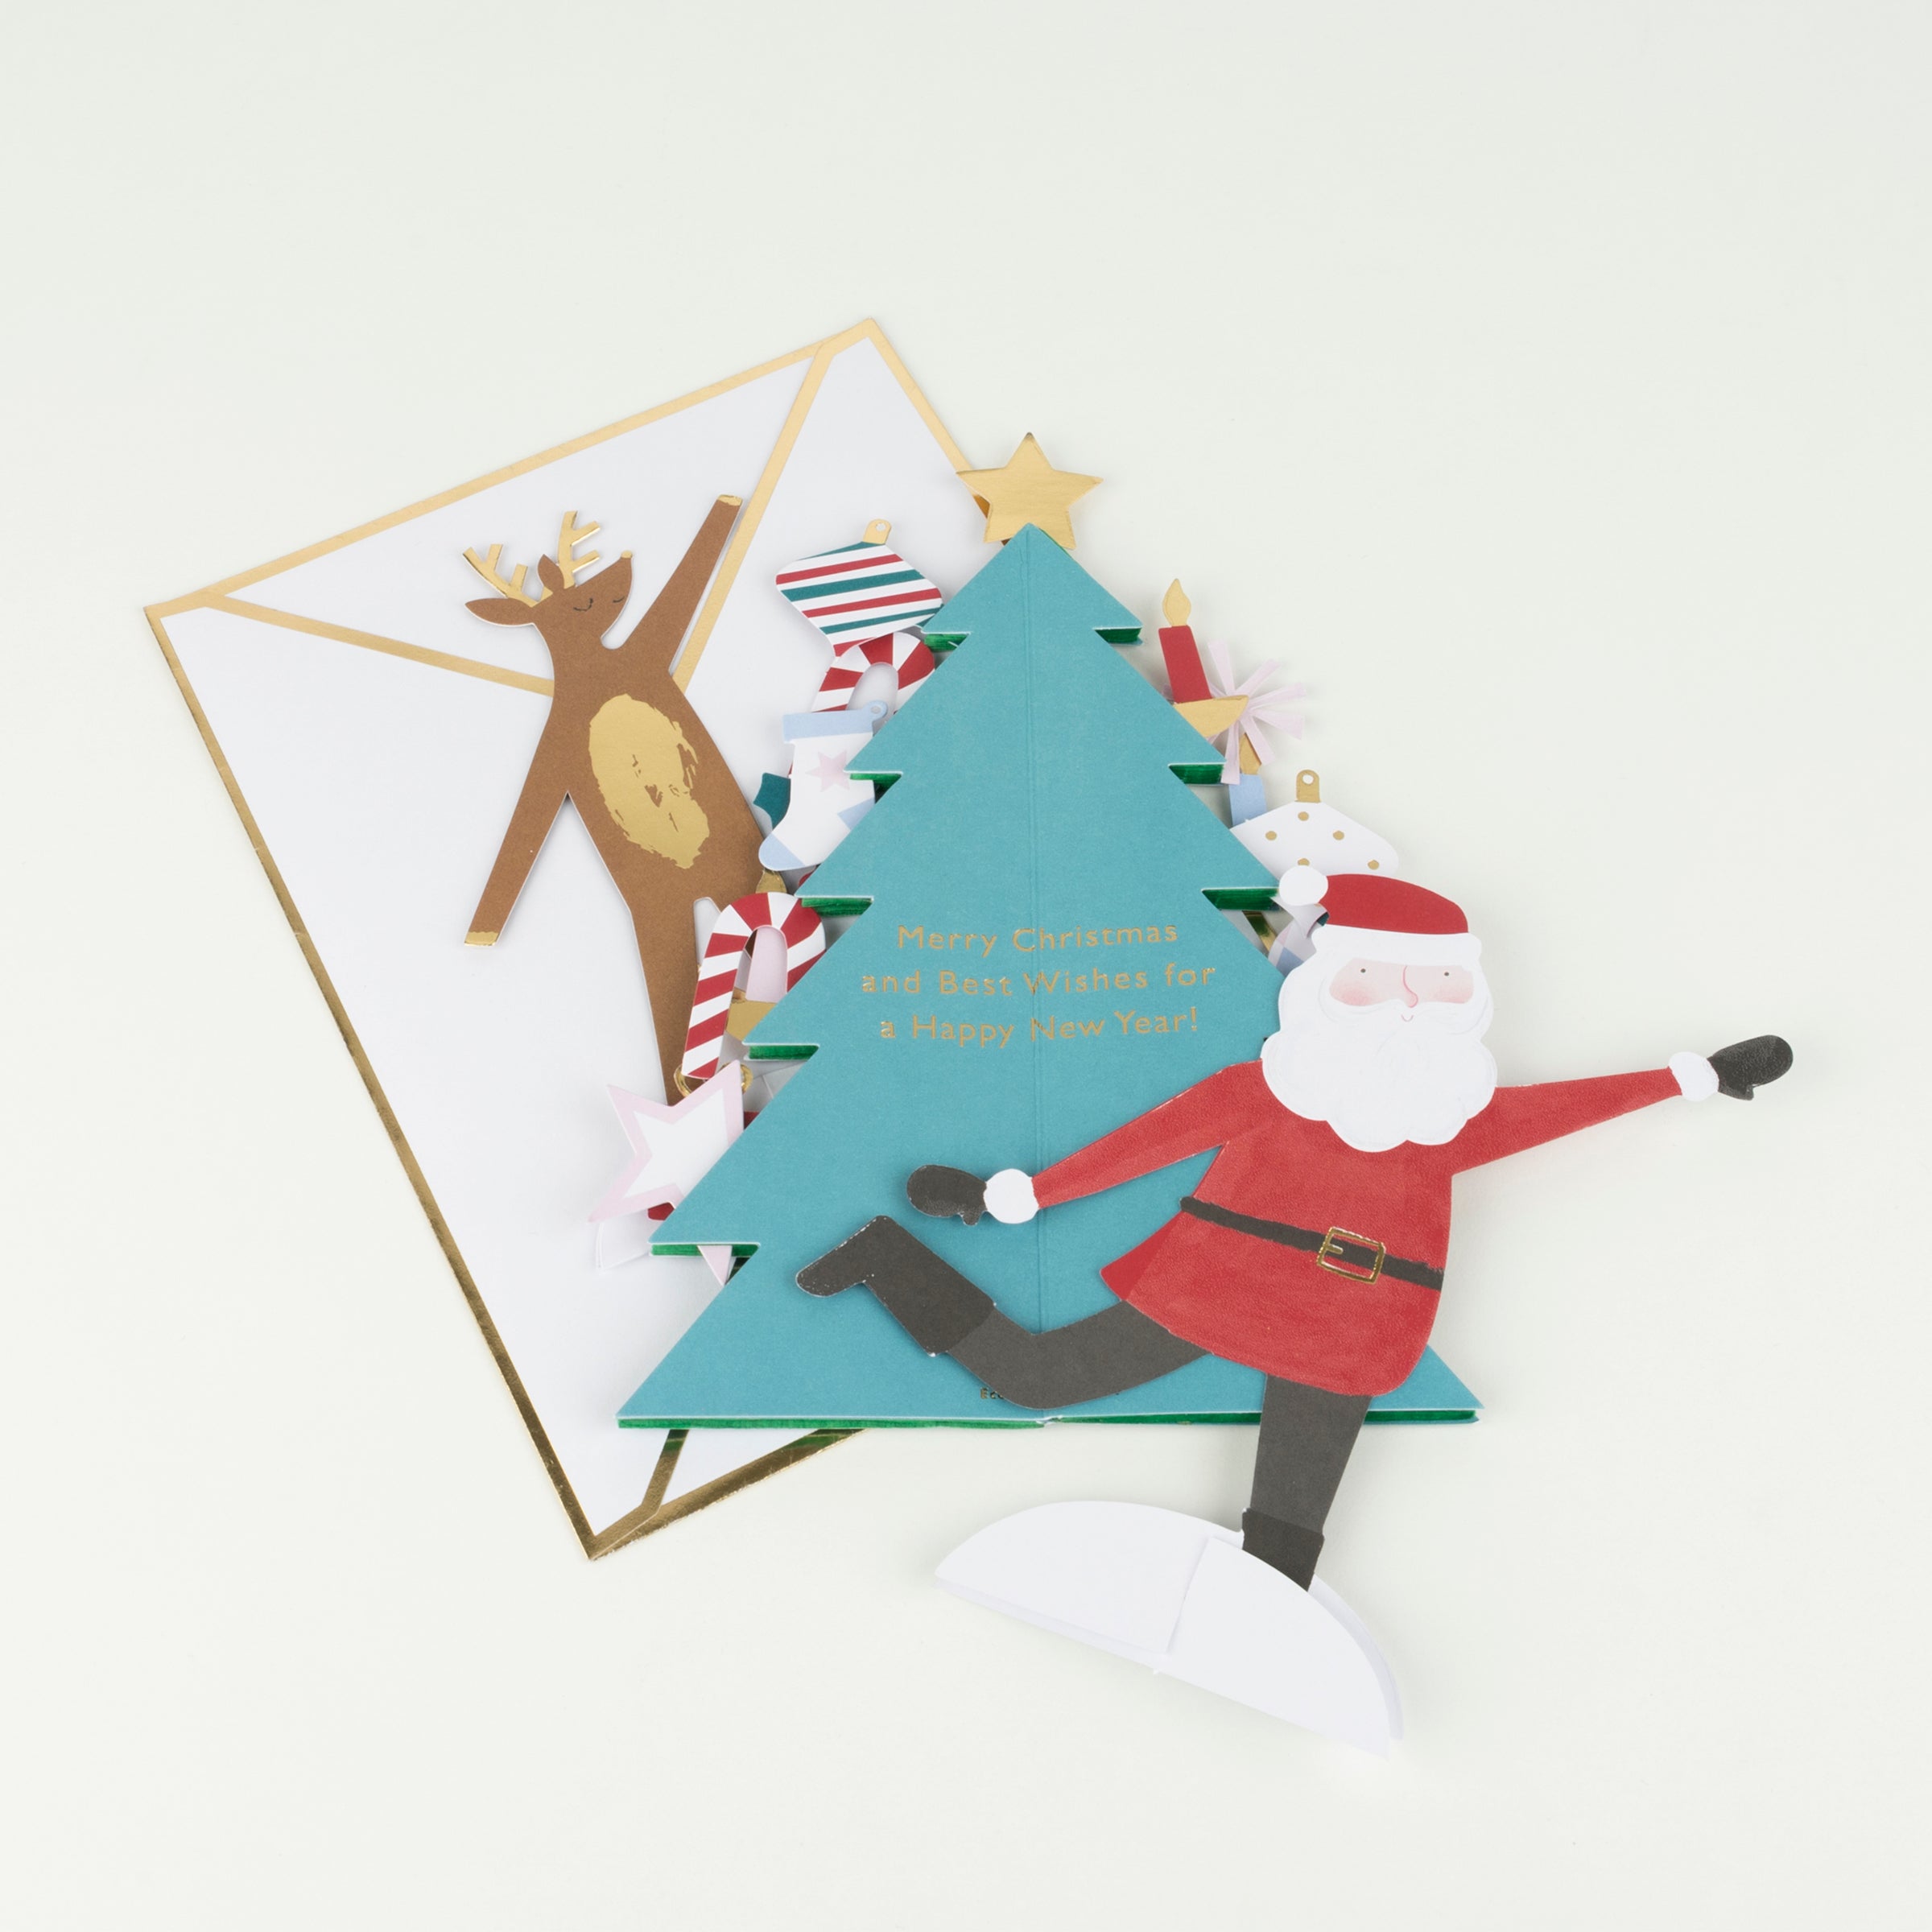 This 3D Christmas card features a honeycomb Christmas tree with Santa, and lots of shiny gold foil.